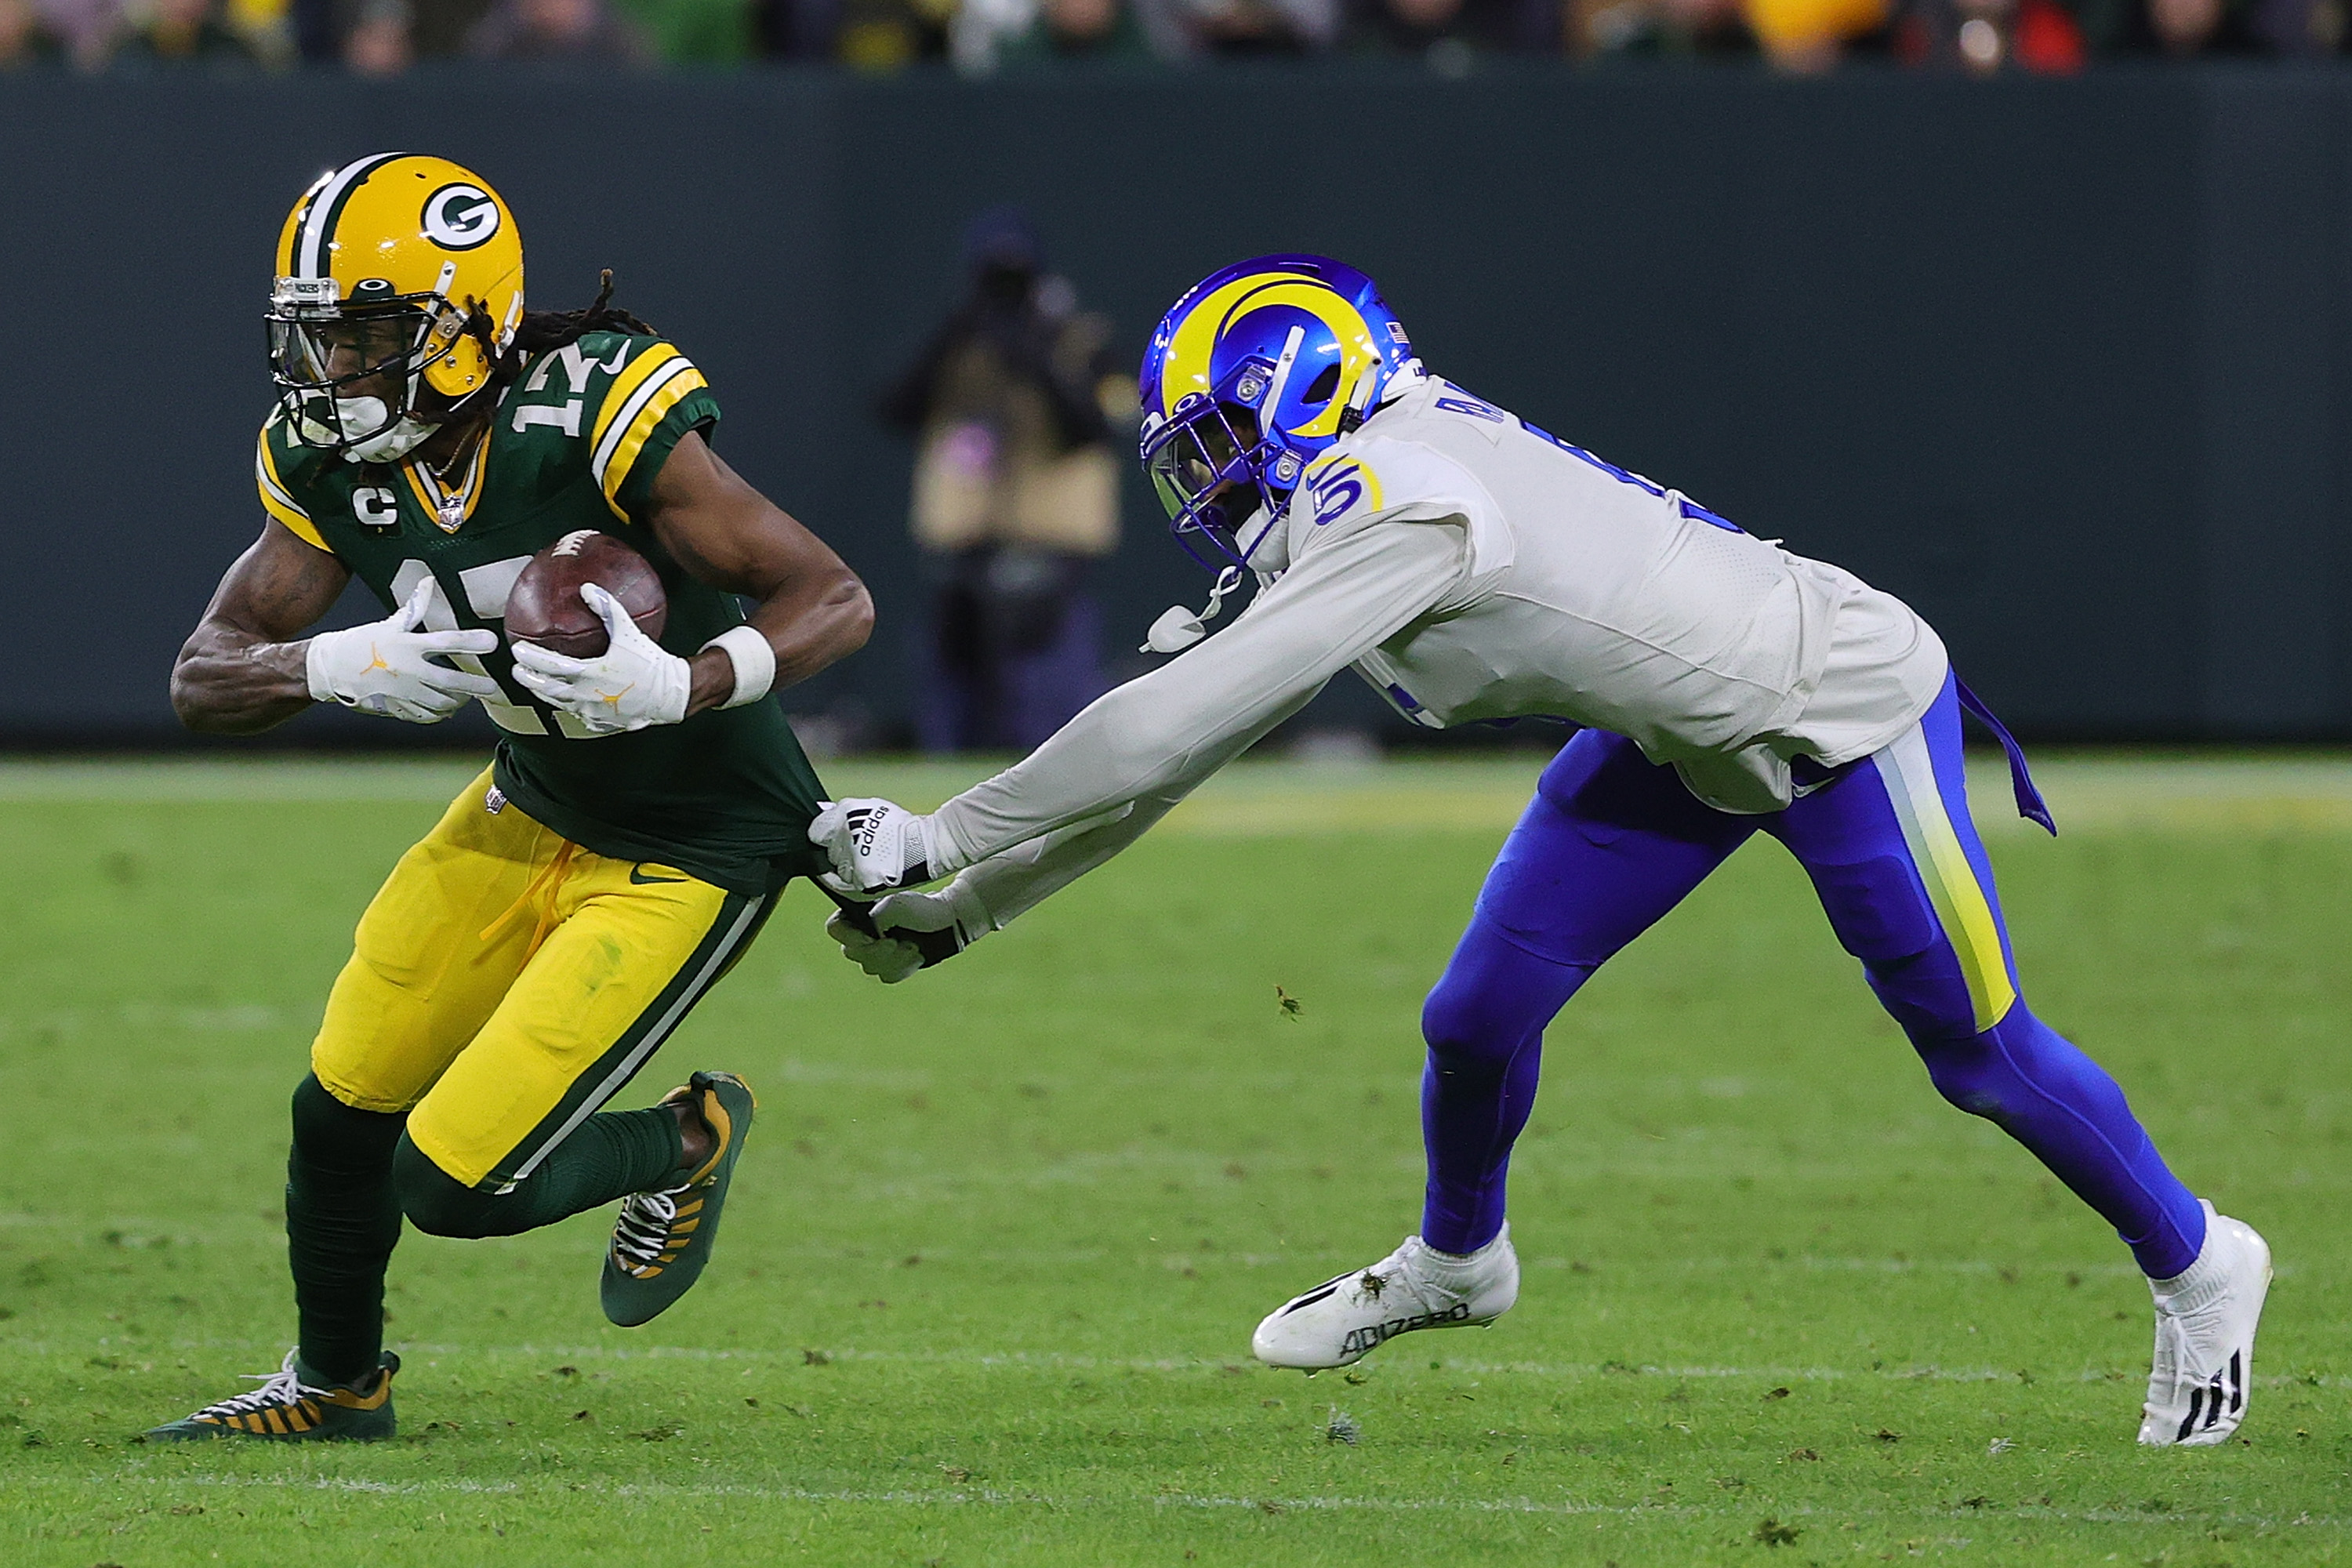 Davante Adams #17 of the Green Bay Packers avoids a tackle by Jalen Ramsey #5 of the Los Angeles Rams during a game at Lambeau Field on November 28, 2021 in Green Bay, Wisconsin.